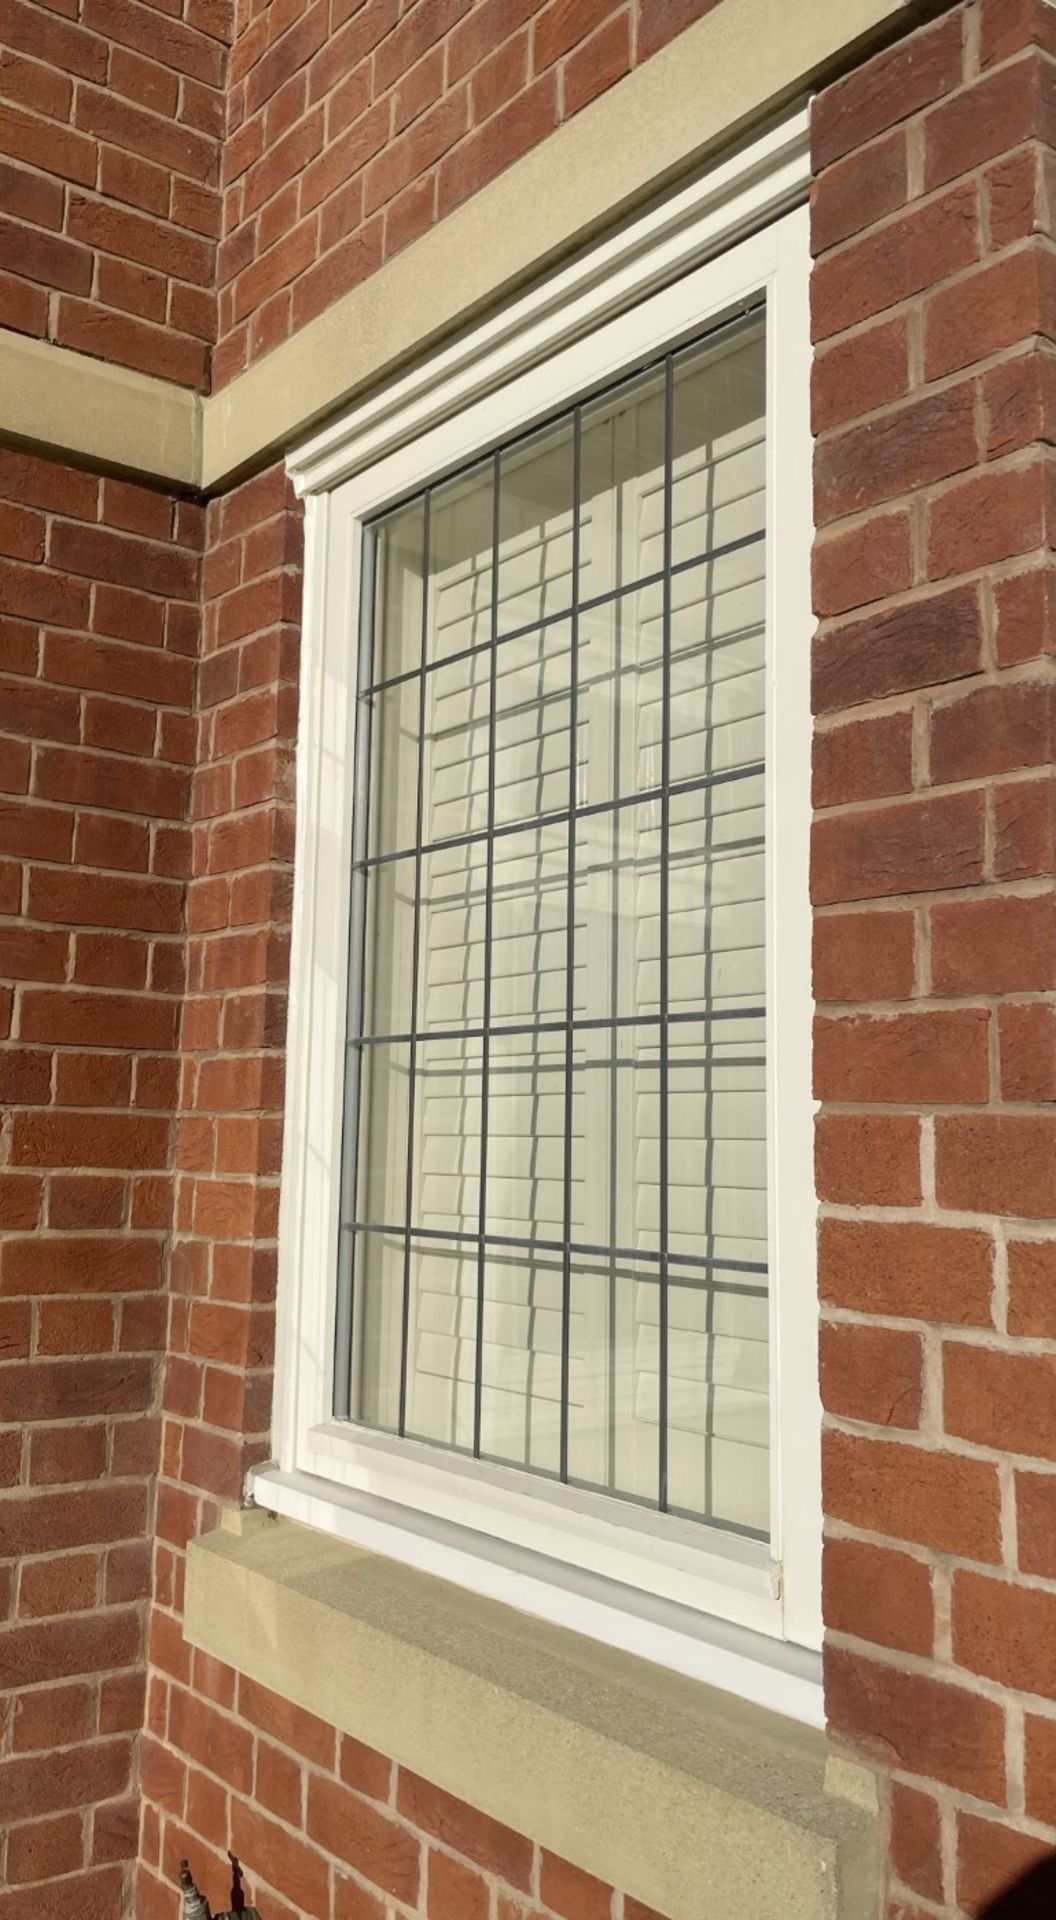 1 x Hardwood Timber Double Glazed Window Frames fitted with Shutter Blinds, In White - Ref: PAN108 - Image 14 of 19